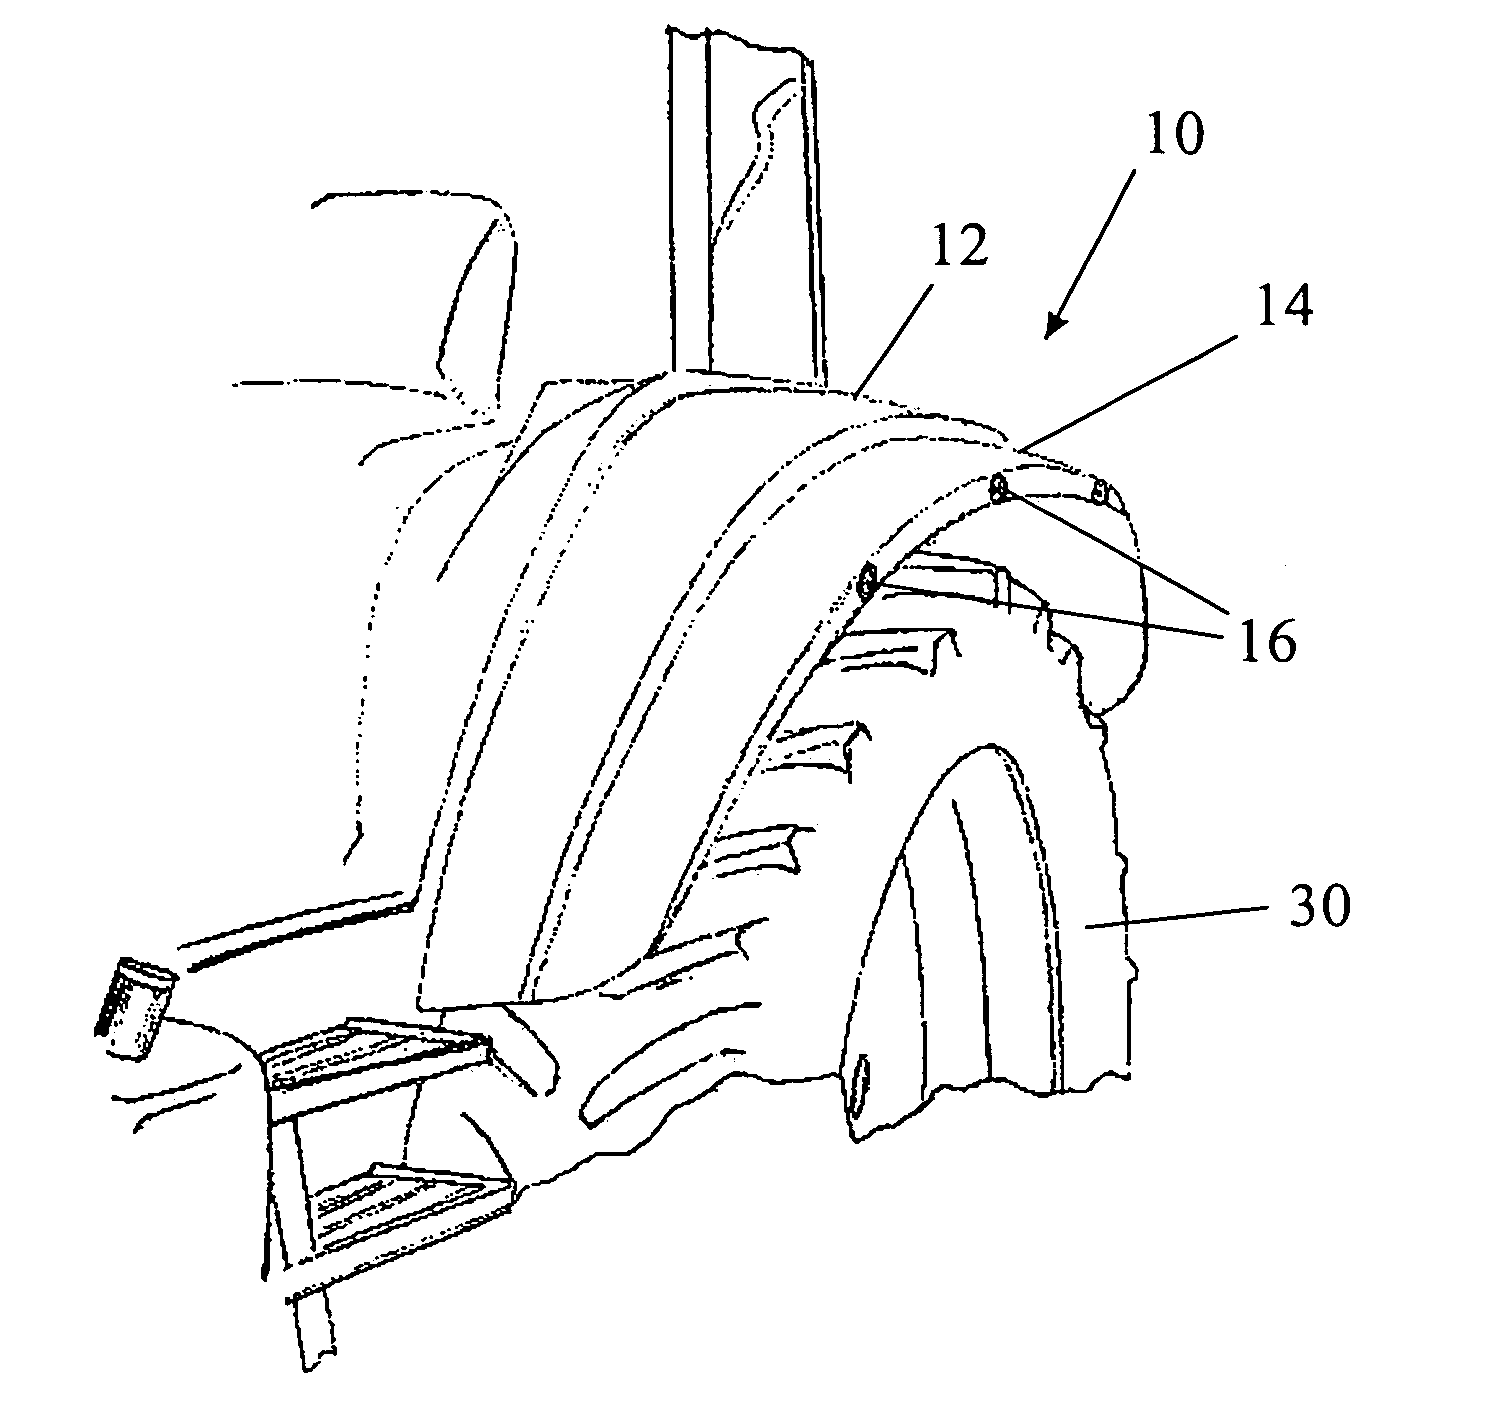 Mudguard for a wheel of an agricultural vehicle